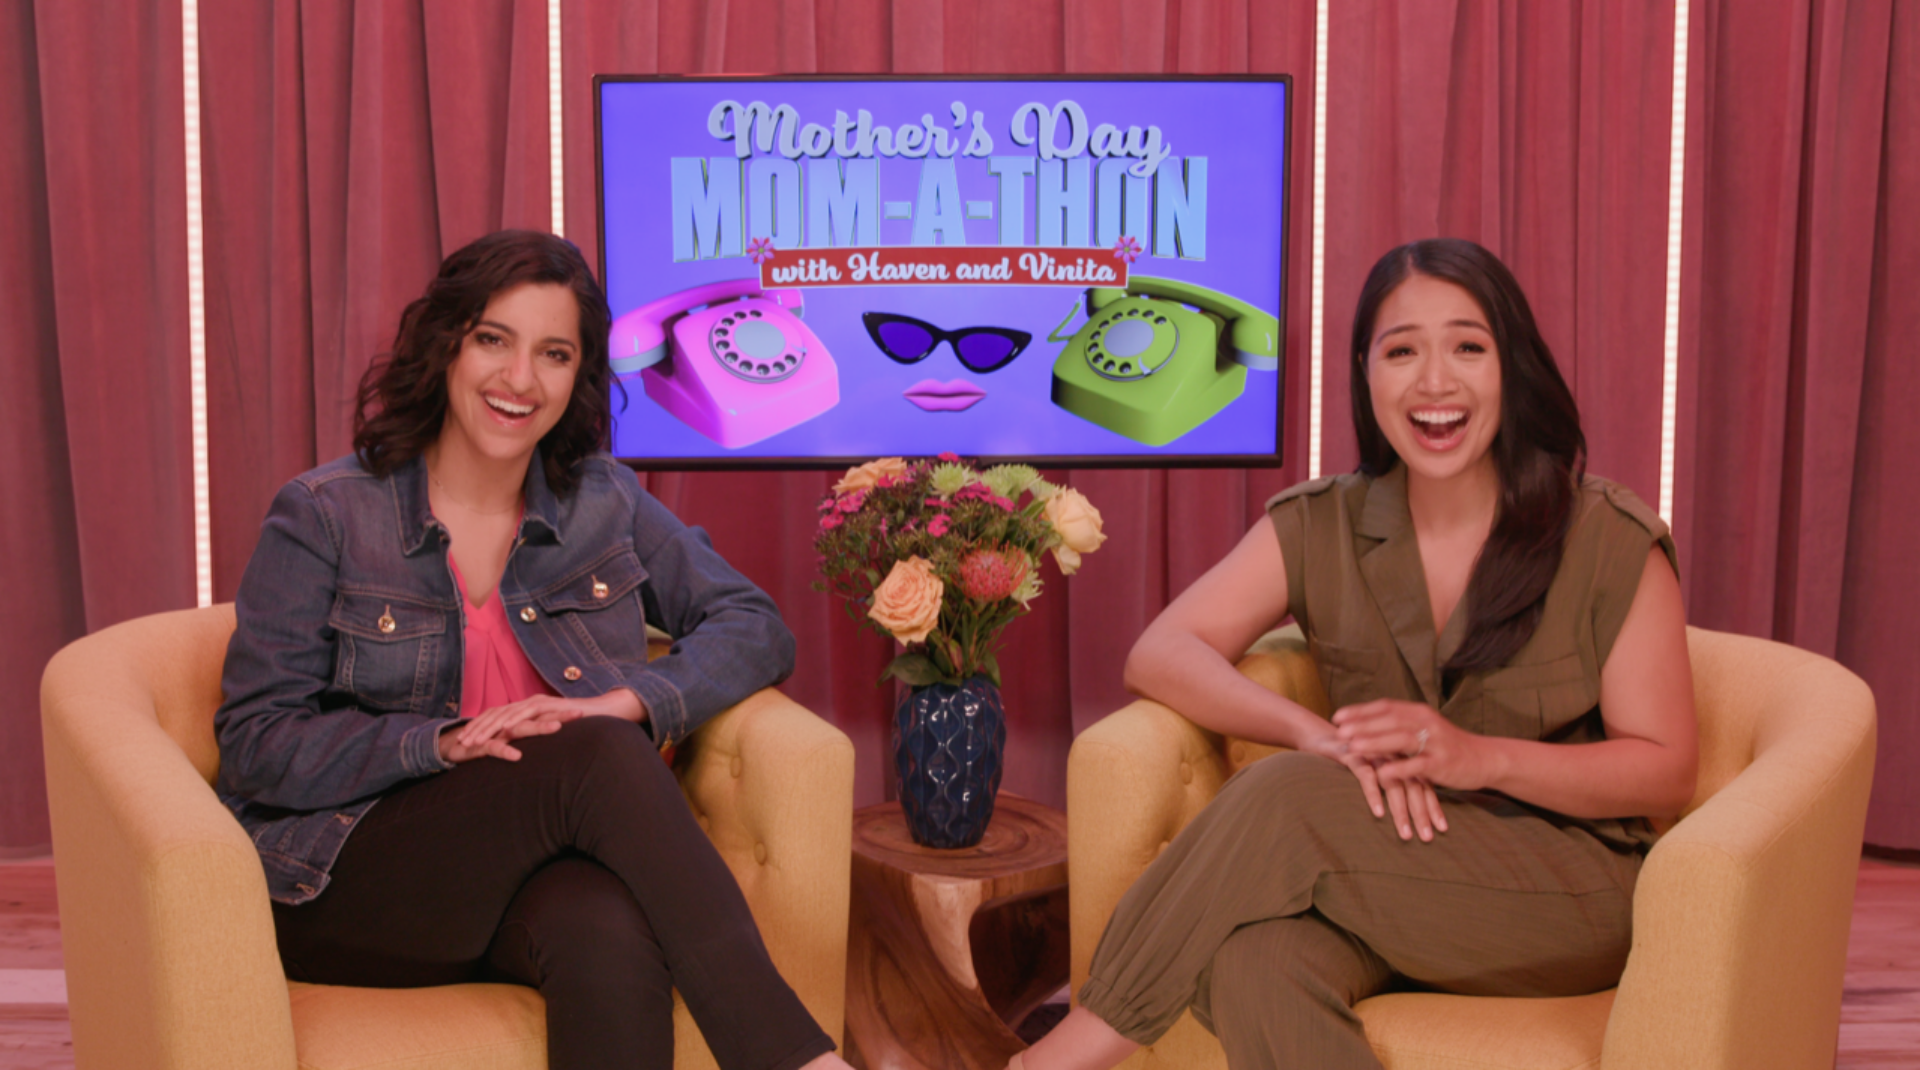 Just in time for Mother's Day, Vinita Khilnani and Haven Everly host a brand new variety show entitled Mother’s Day Mom-A-Thon with Haven and Vinita celebrating motherhood from a uniquely Asian perspective.